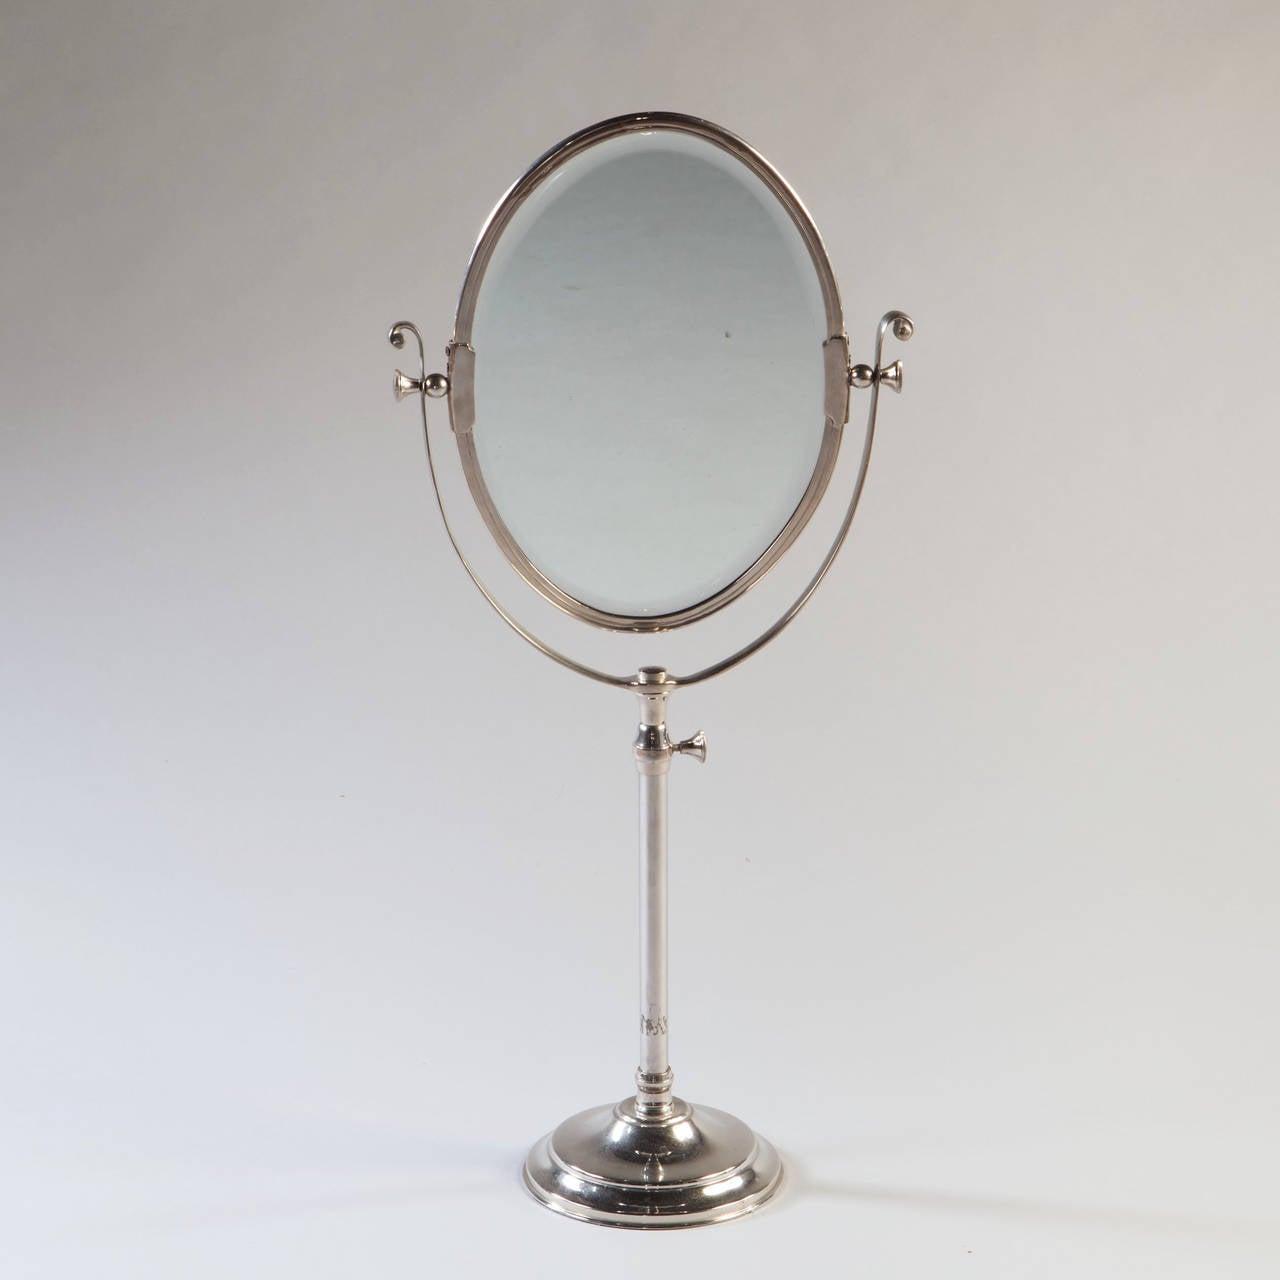 An Edwardian overscale oval silver plate dressing mirror of adjustable height.